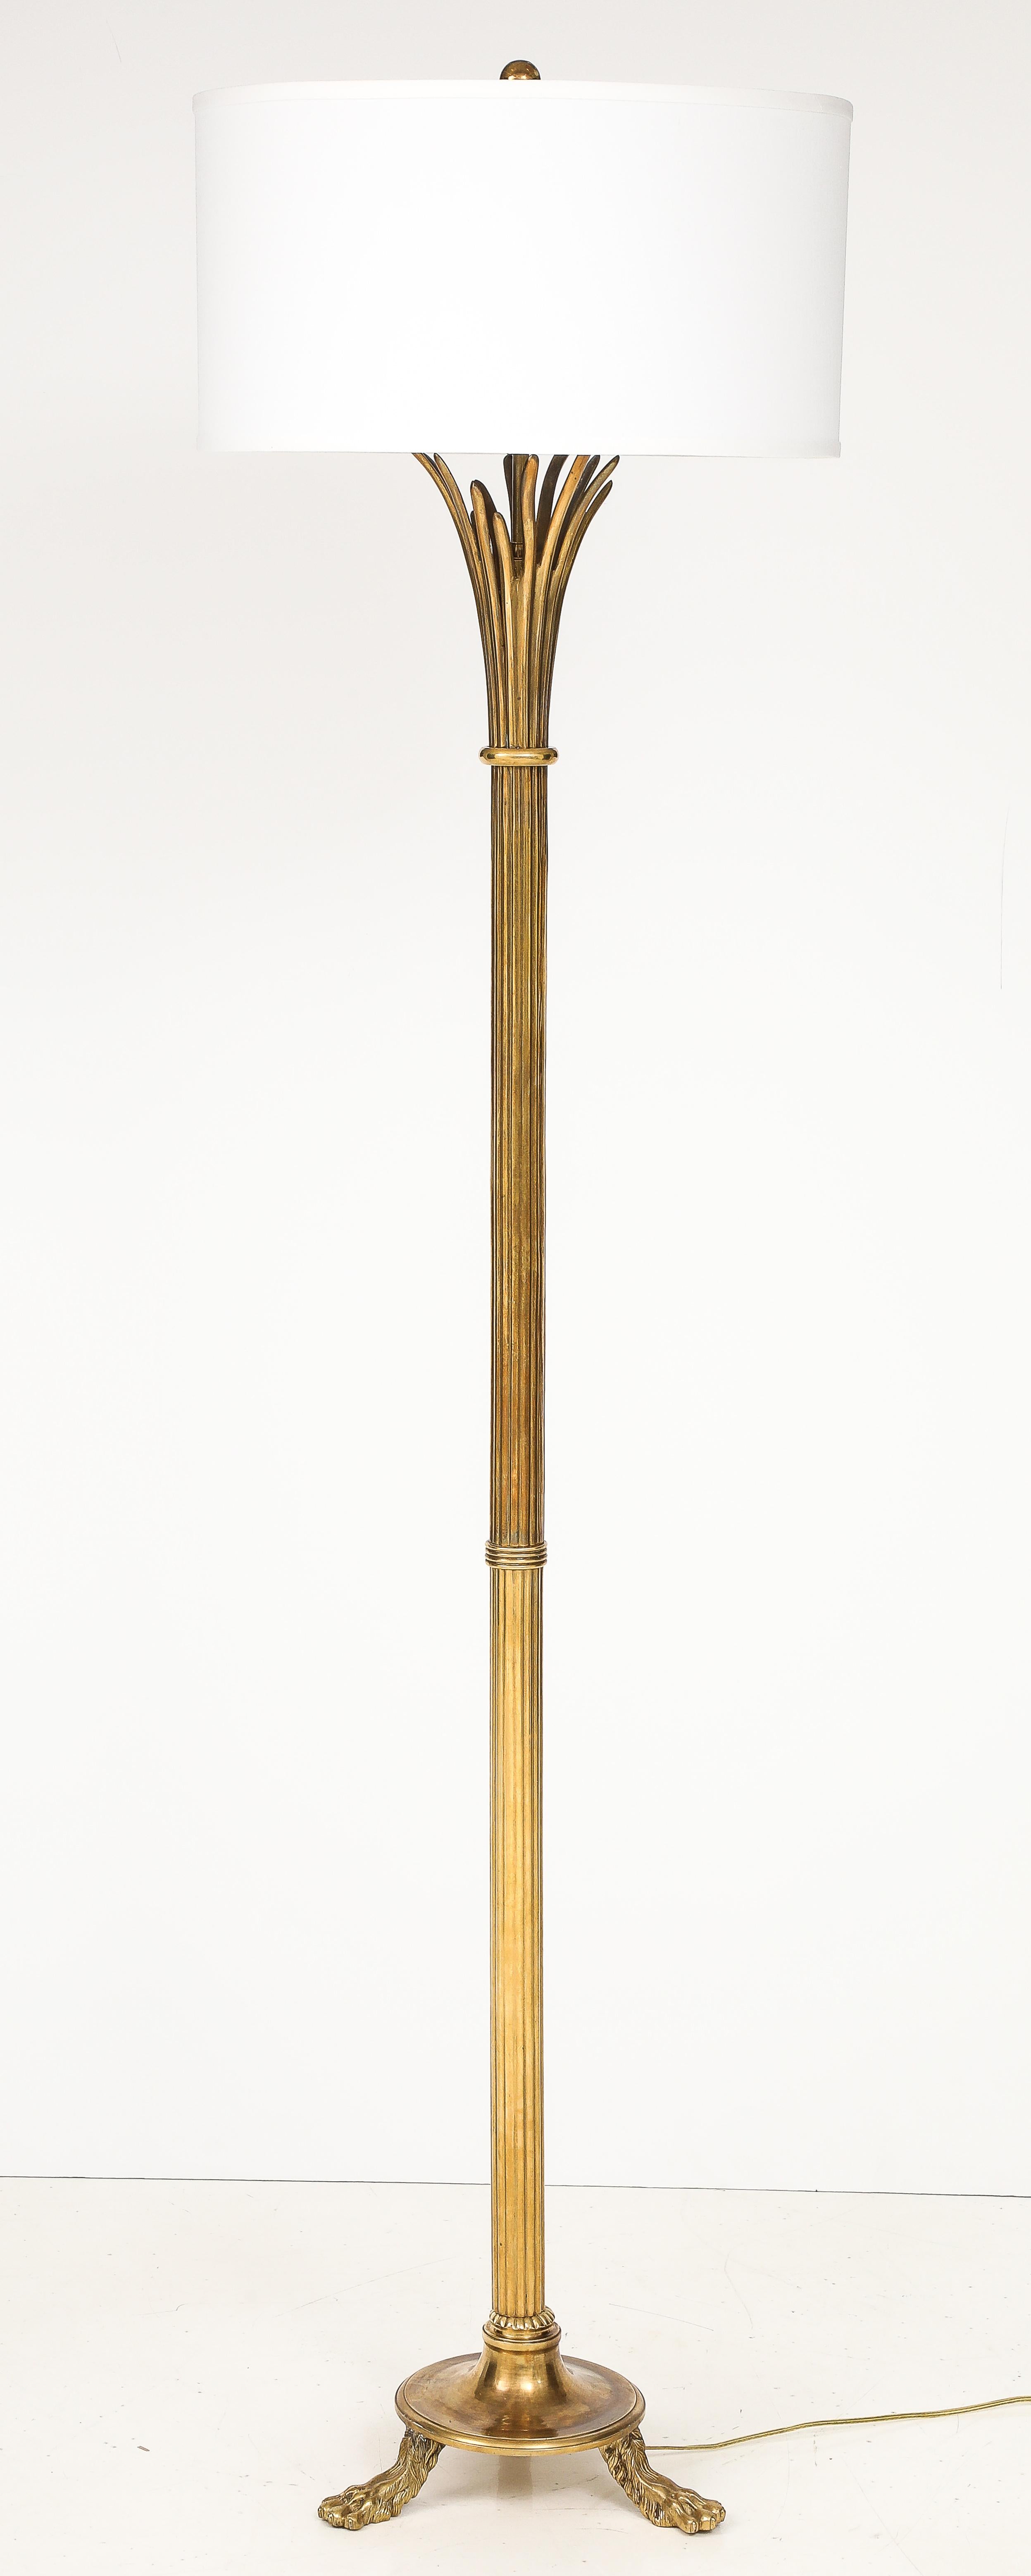 1960's mid-century modern solid brass tall French floor lamp, newly rewired and lightly hand polished, with some wear and patina to the brass due to age and use.

Shade for photography only.